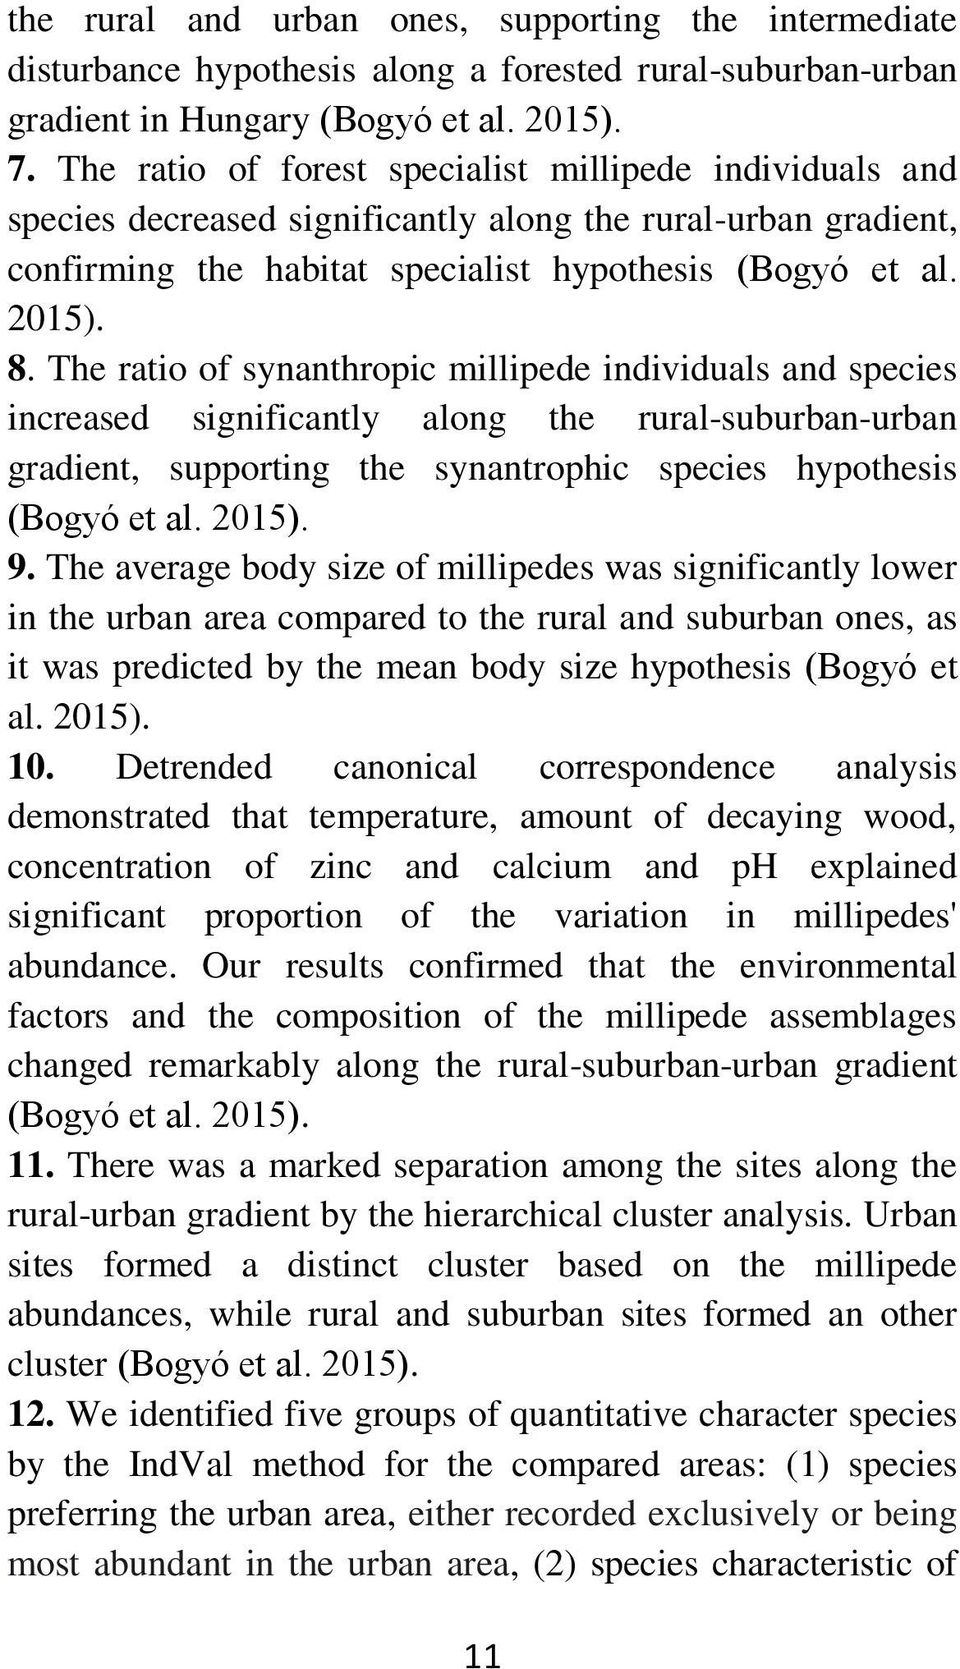 The ratio of synanthropic millipede individuals and species increased significantly along the rural-suburban-urban gradient, supporting the synantrophic species hypothesis (Bogyó et al. 2015). 9.